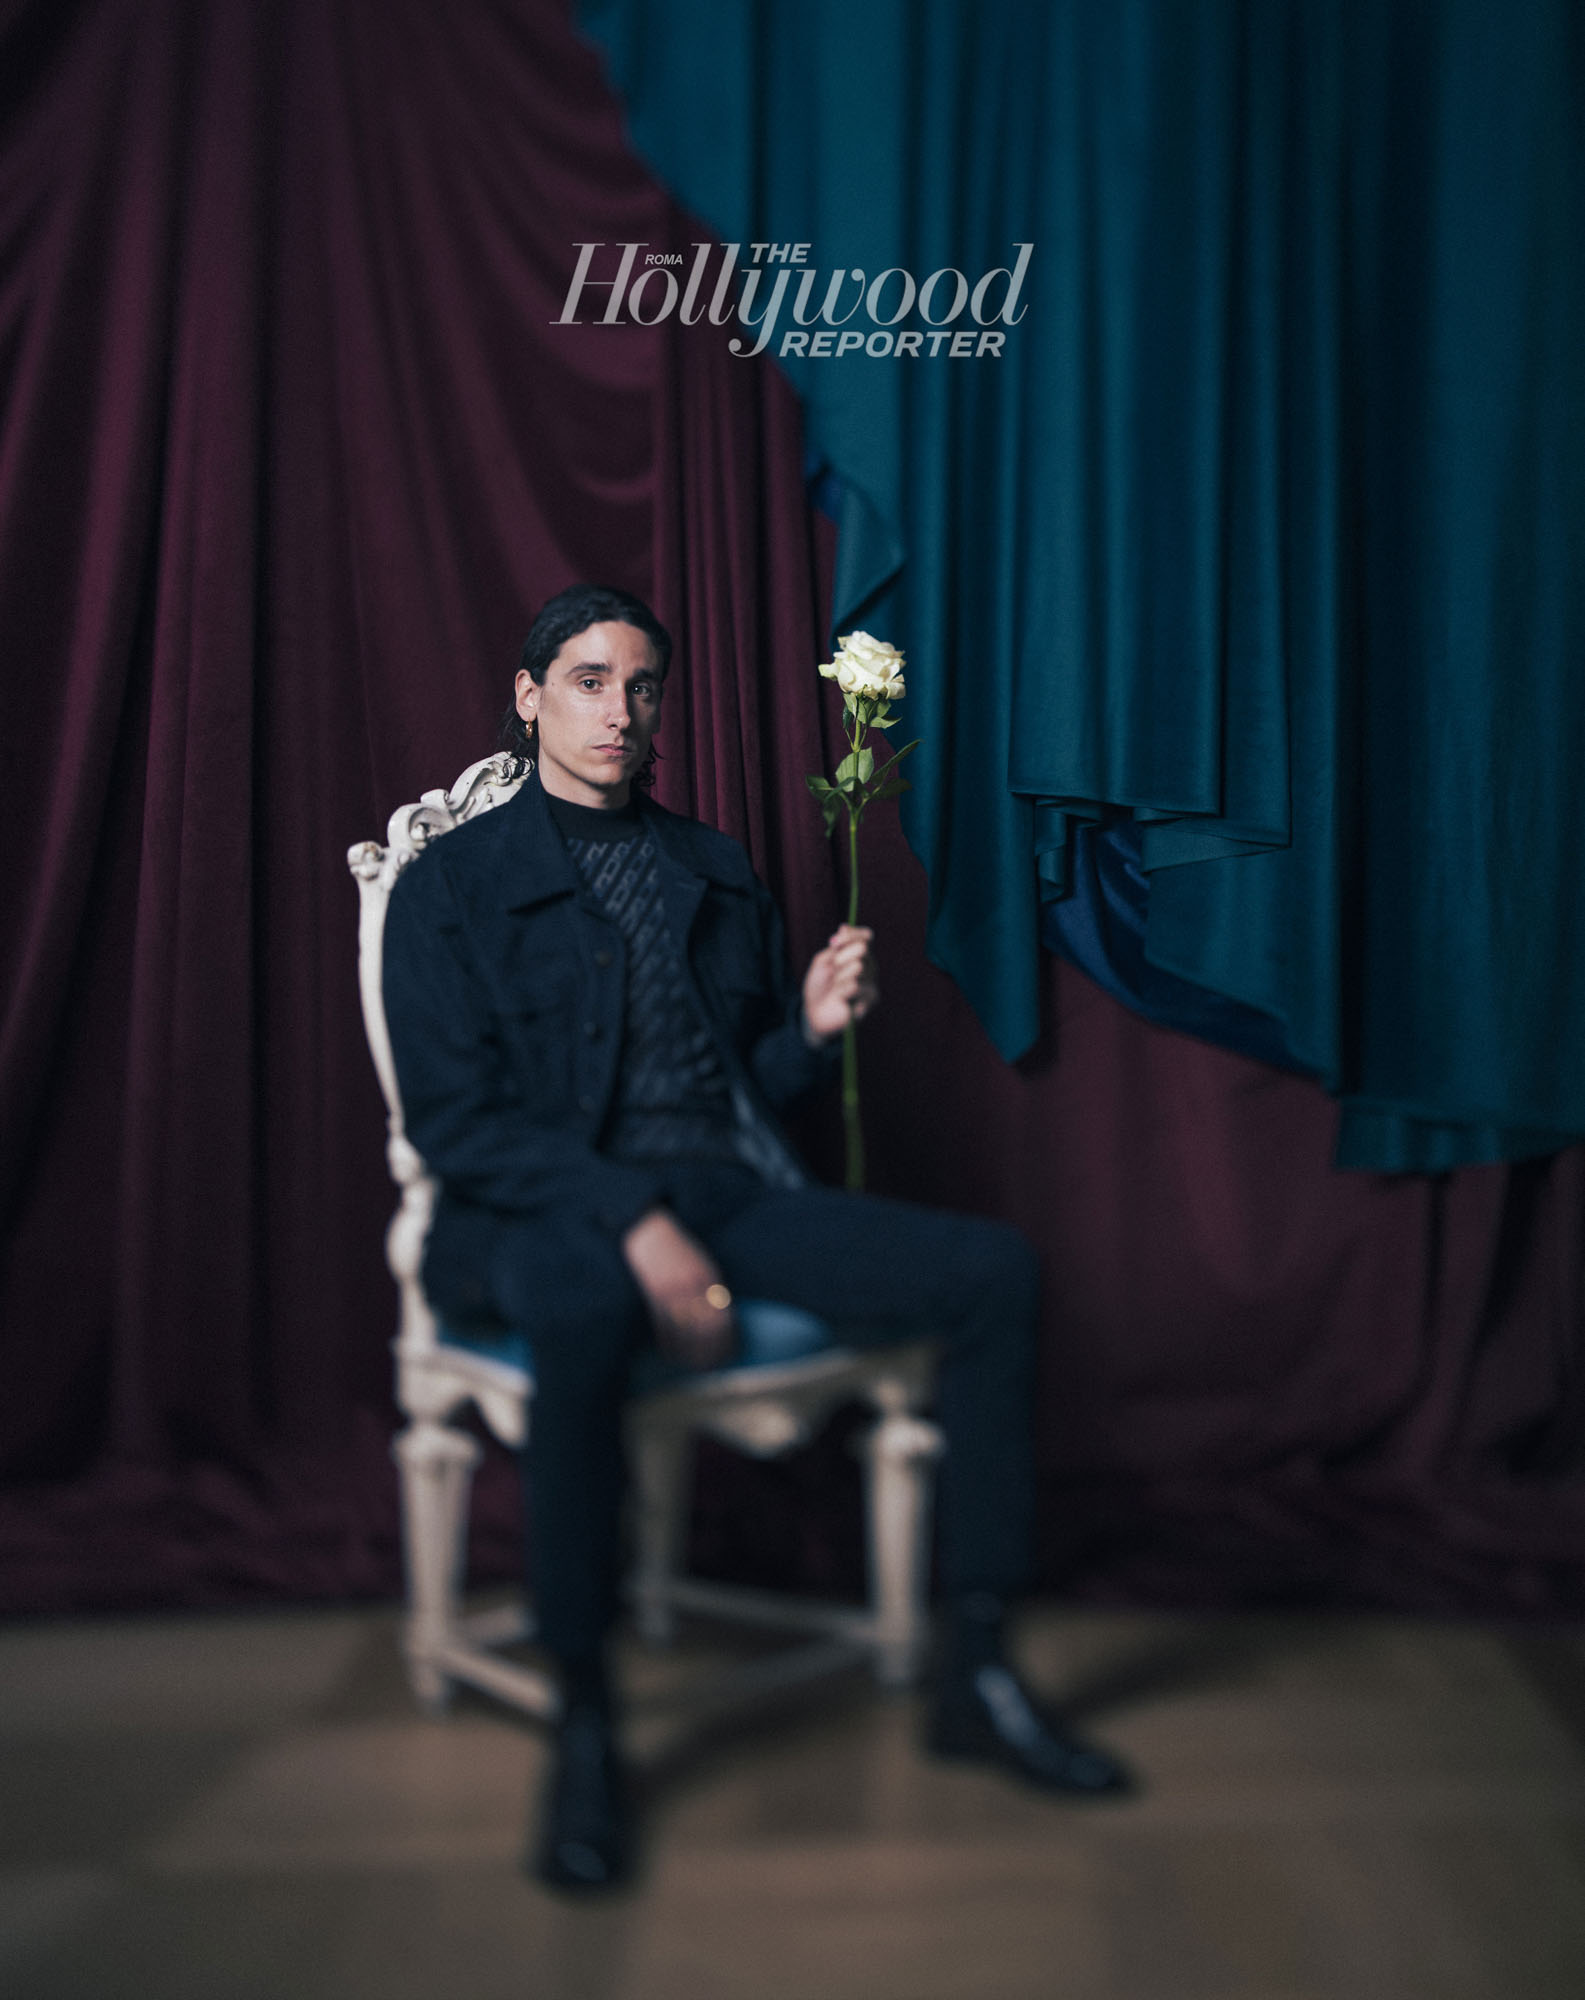 The Hollywood Reporter7